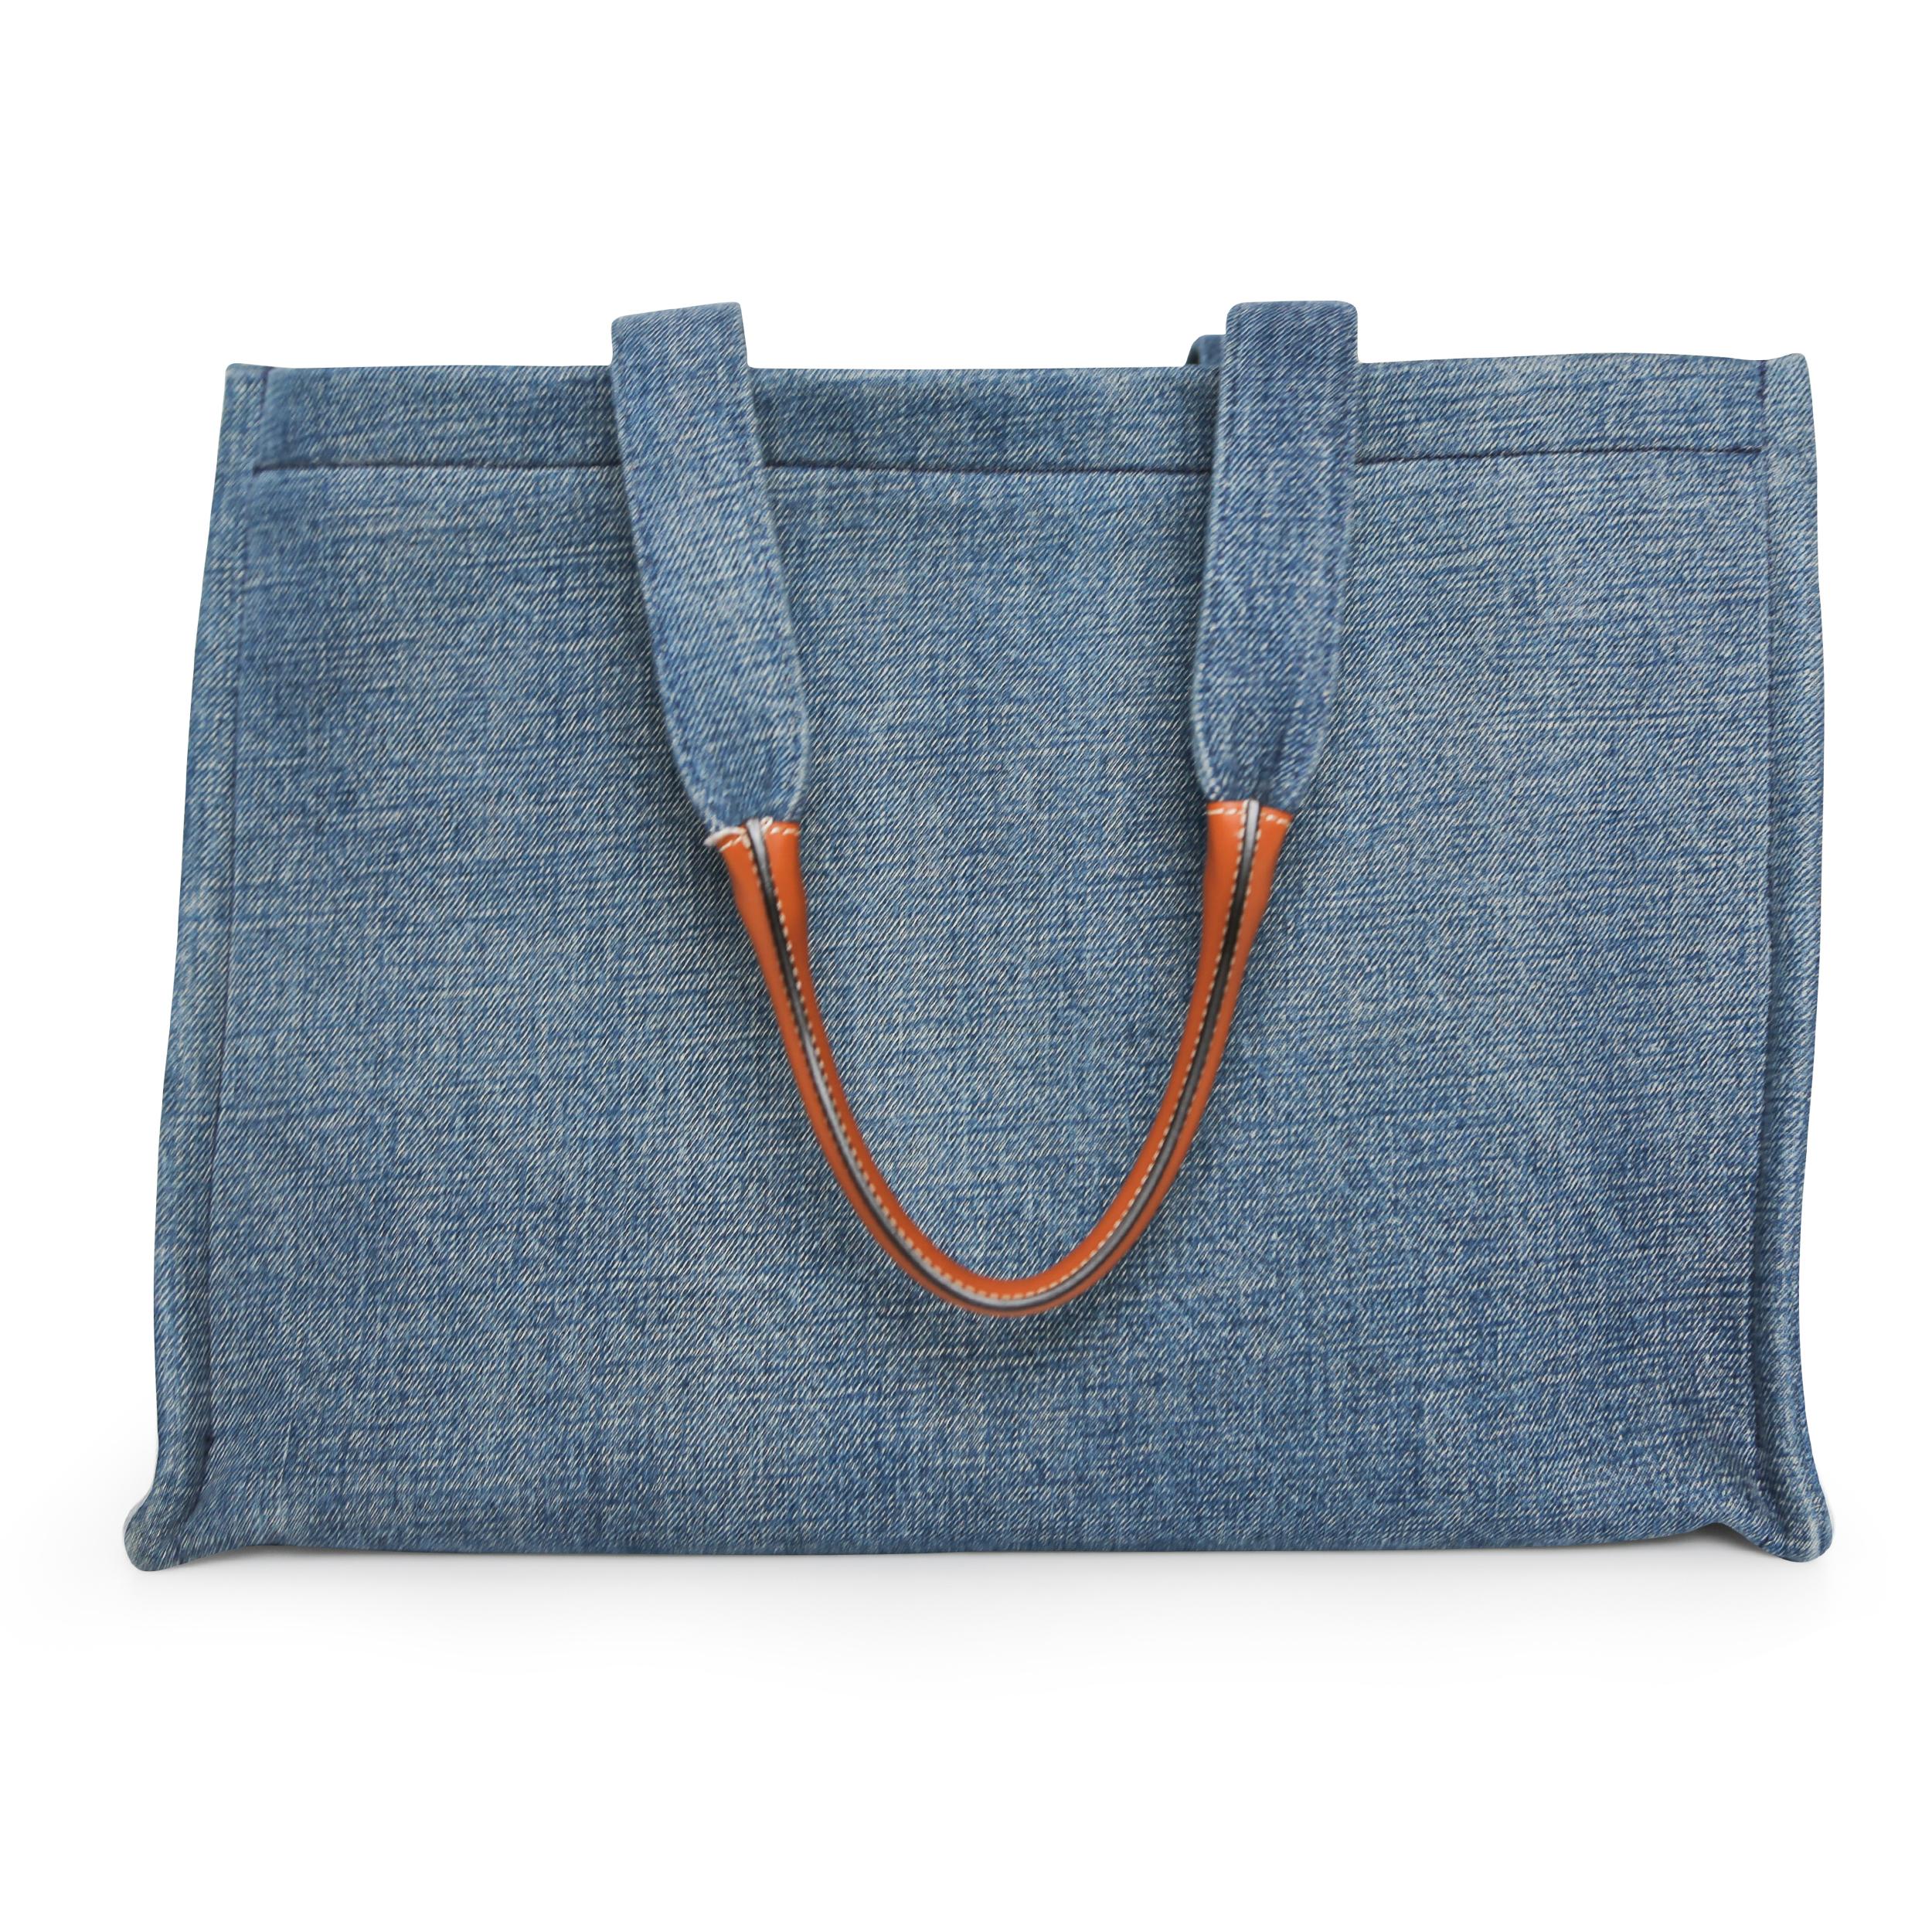 Introducing the Cabas Horizontal Tote, the perfect blend of style and functionality. Crafted with a blue denim exterior, this tote features an eye-catching ivory and blue knit logo patch, and camel leather trim. With a spacious interior and a